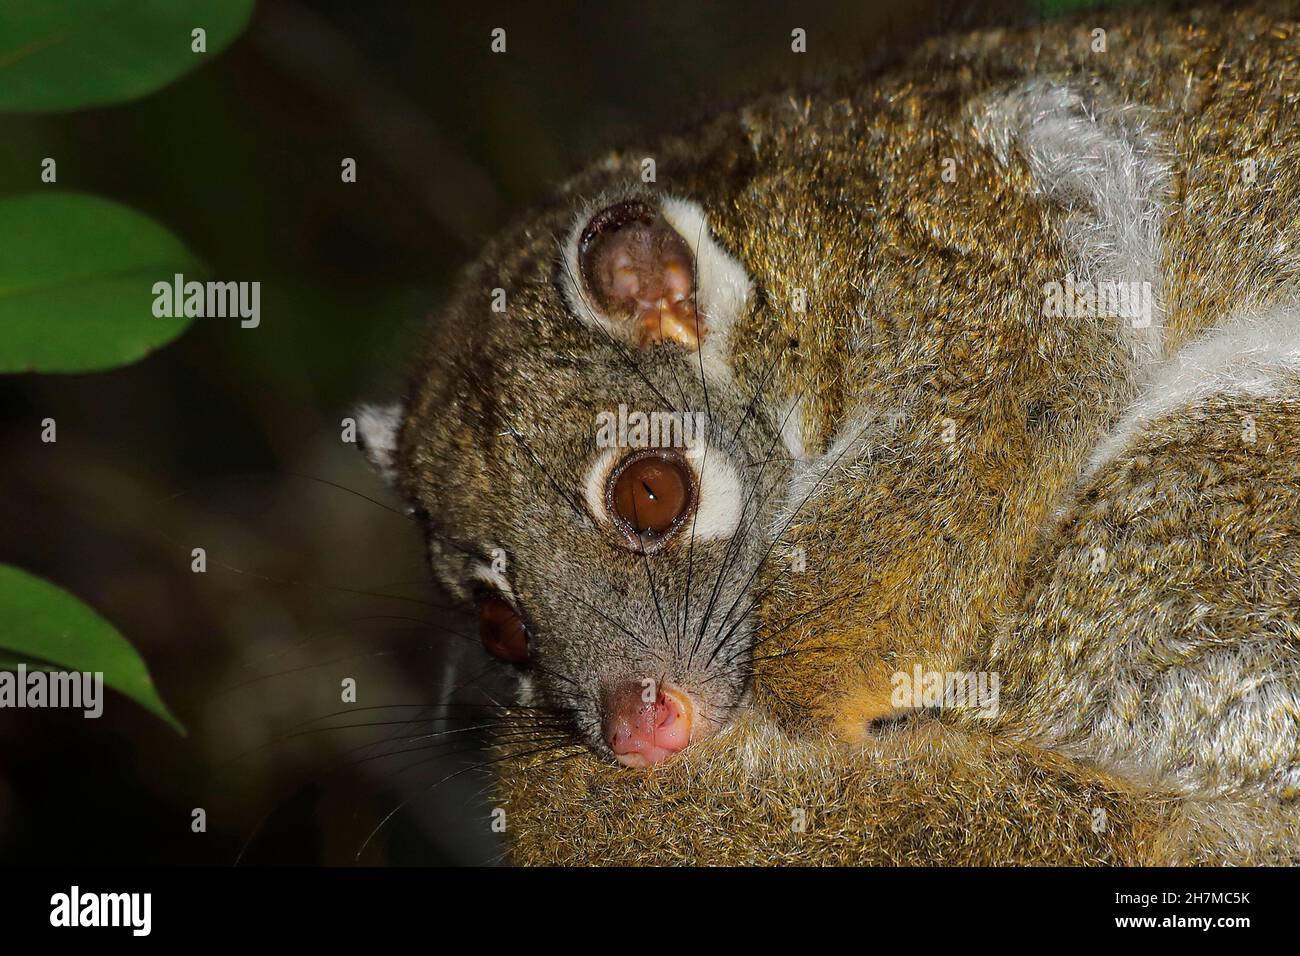 Green ringtail possum (Pseudochirops archeri) head of a possum resting in a tree at night showing the large eyes for its nocturnal lifestyle and the w Stock Photo